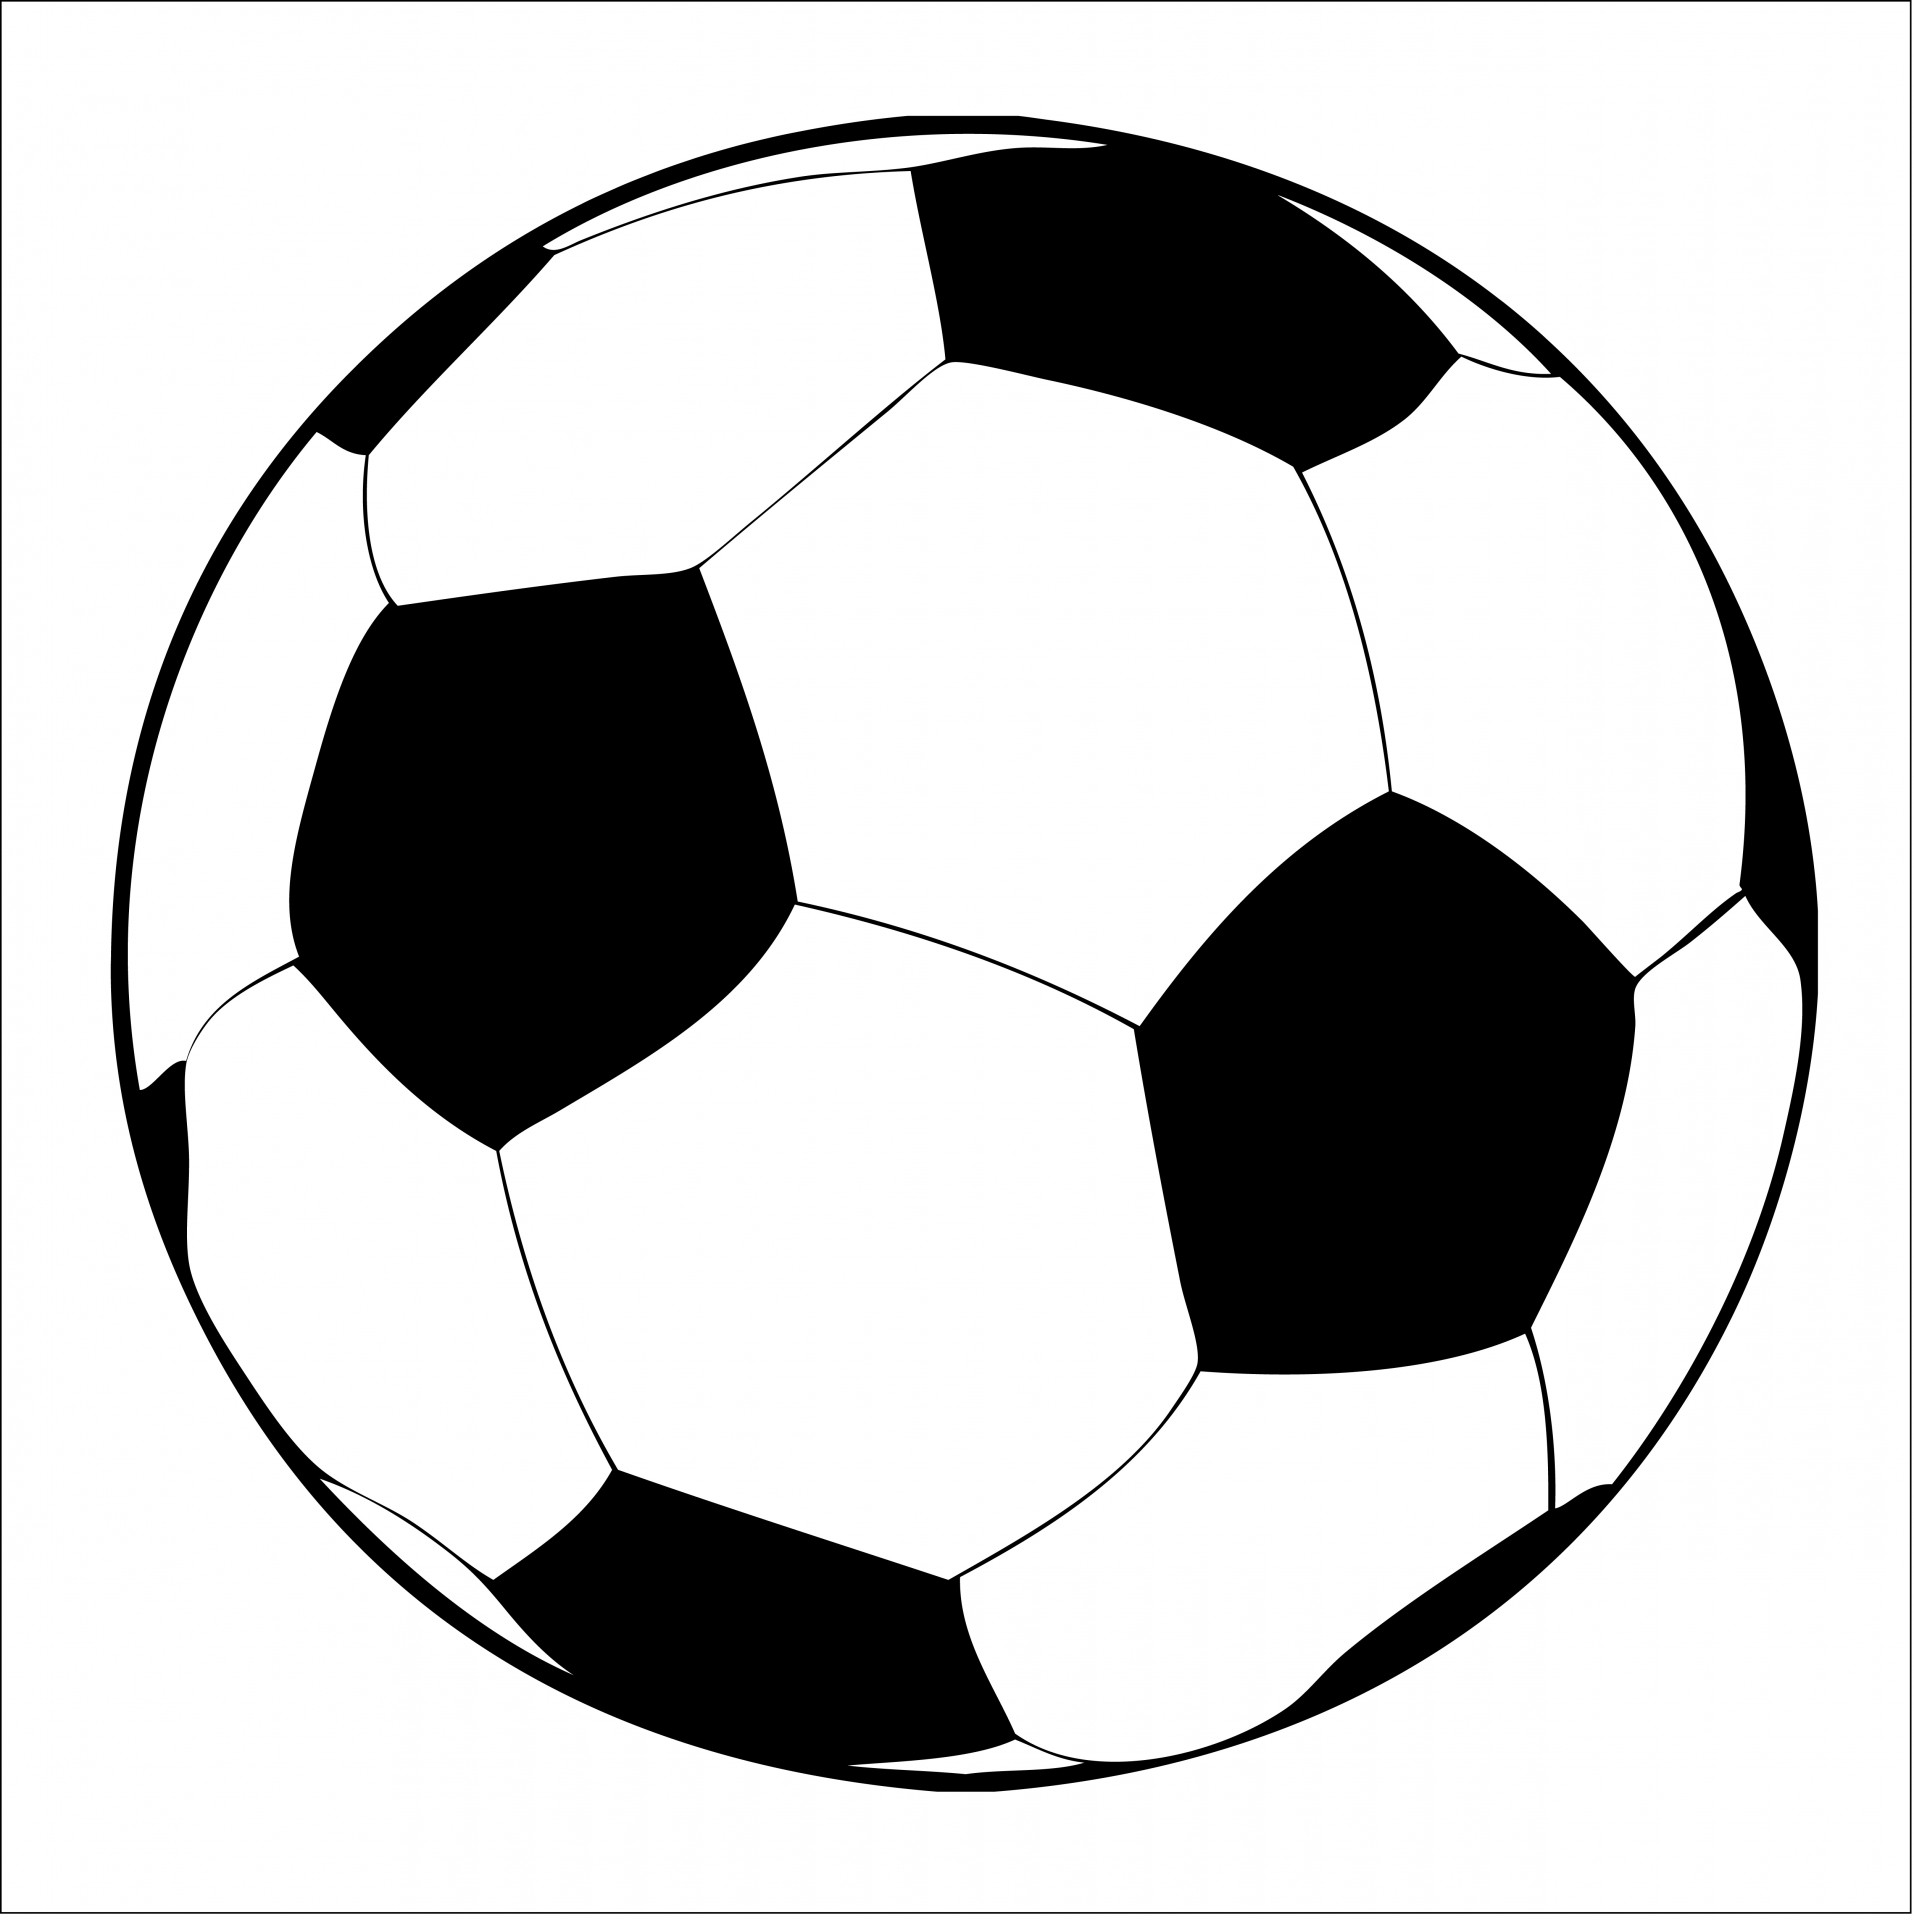 Free Soccer Ball Vector Download - ClipArt Best